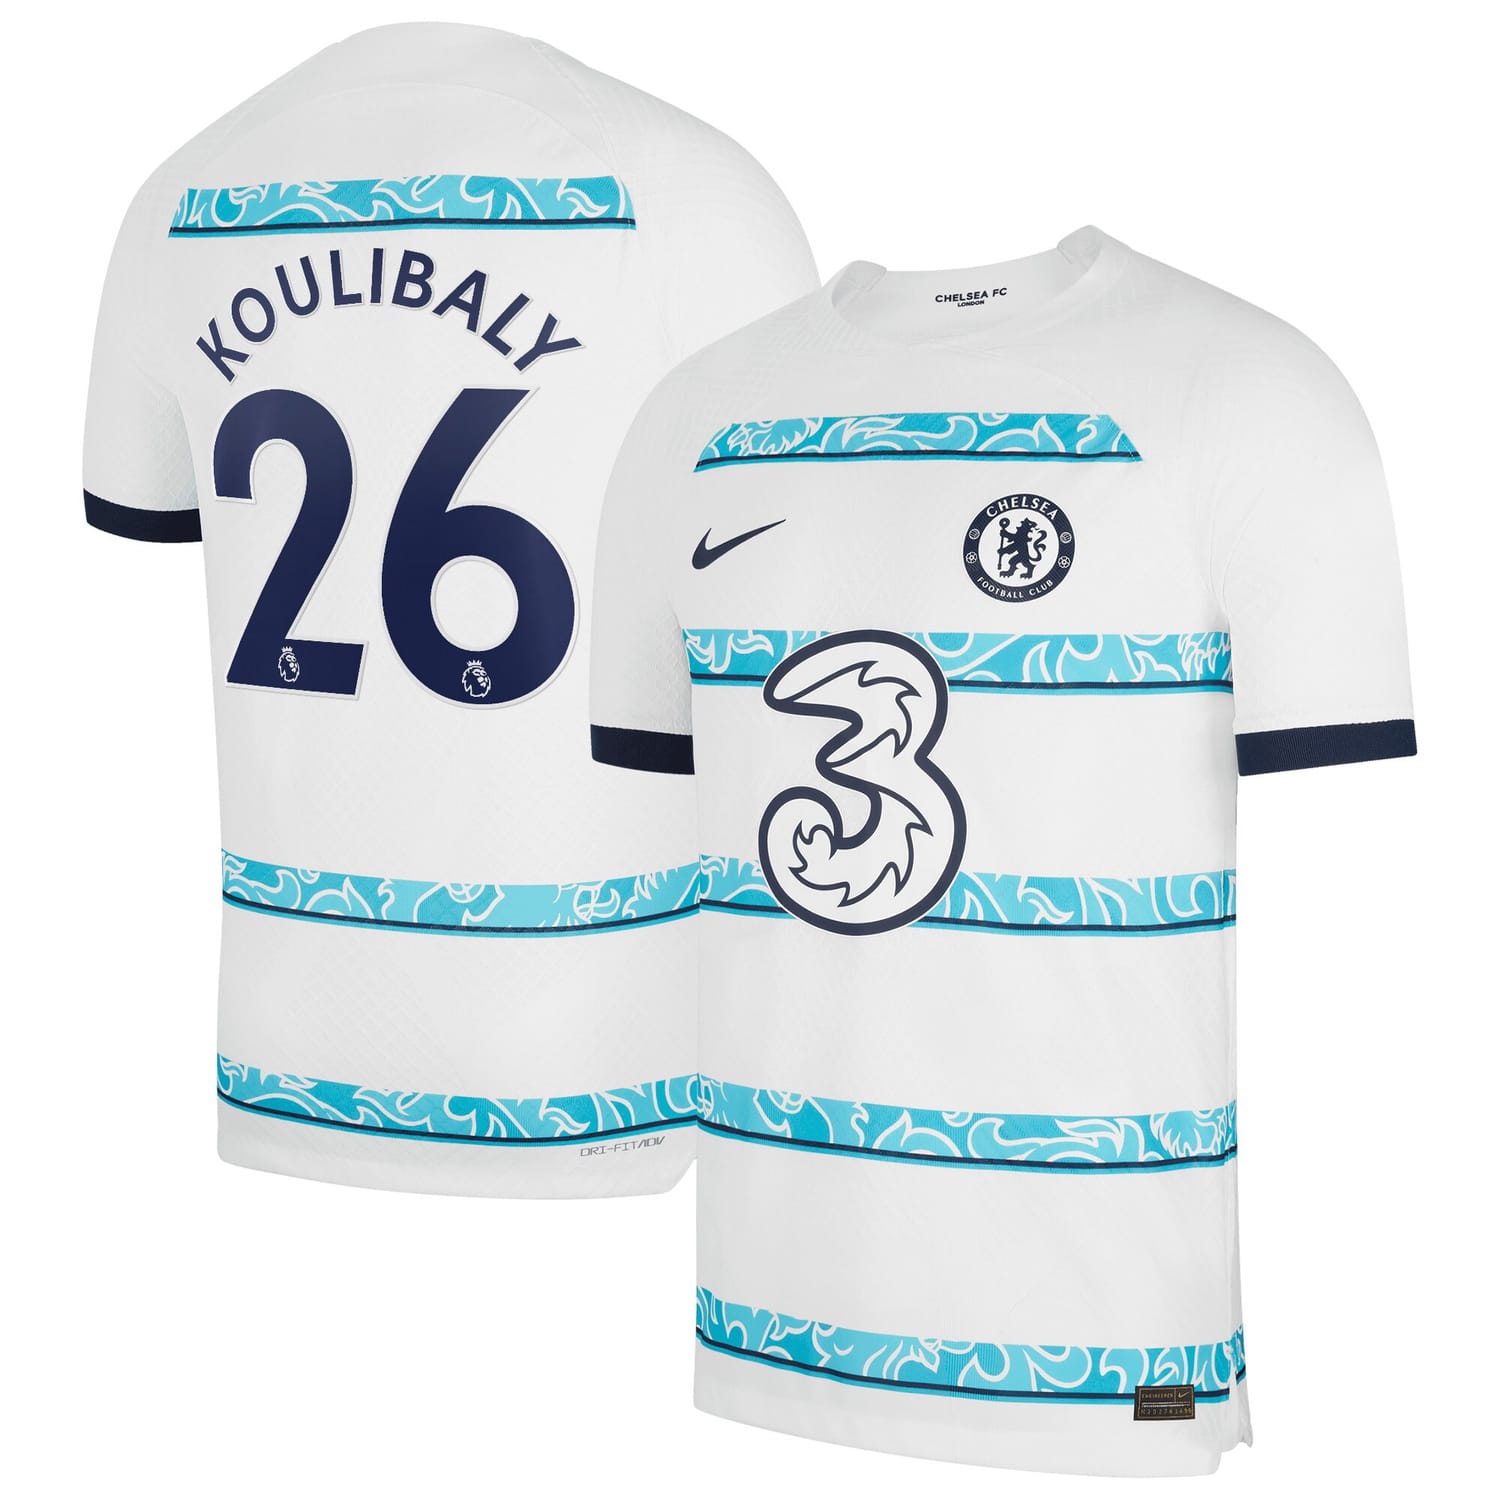 Premier League Chelsea Away Authentic Jersey Shirt 2022-23 player Kalidou Koulibaly 26 printing for Men